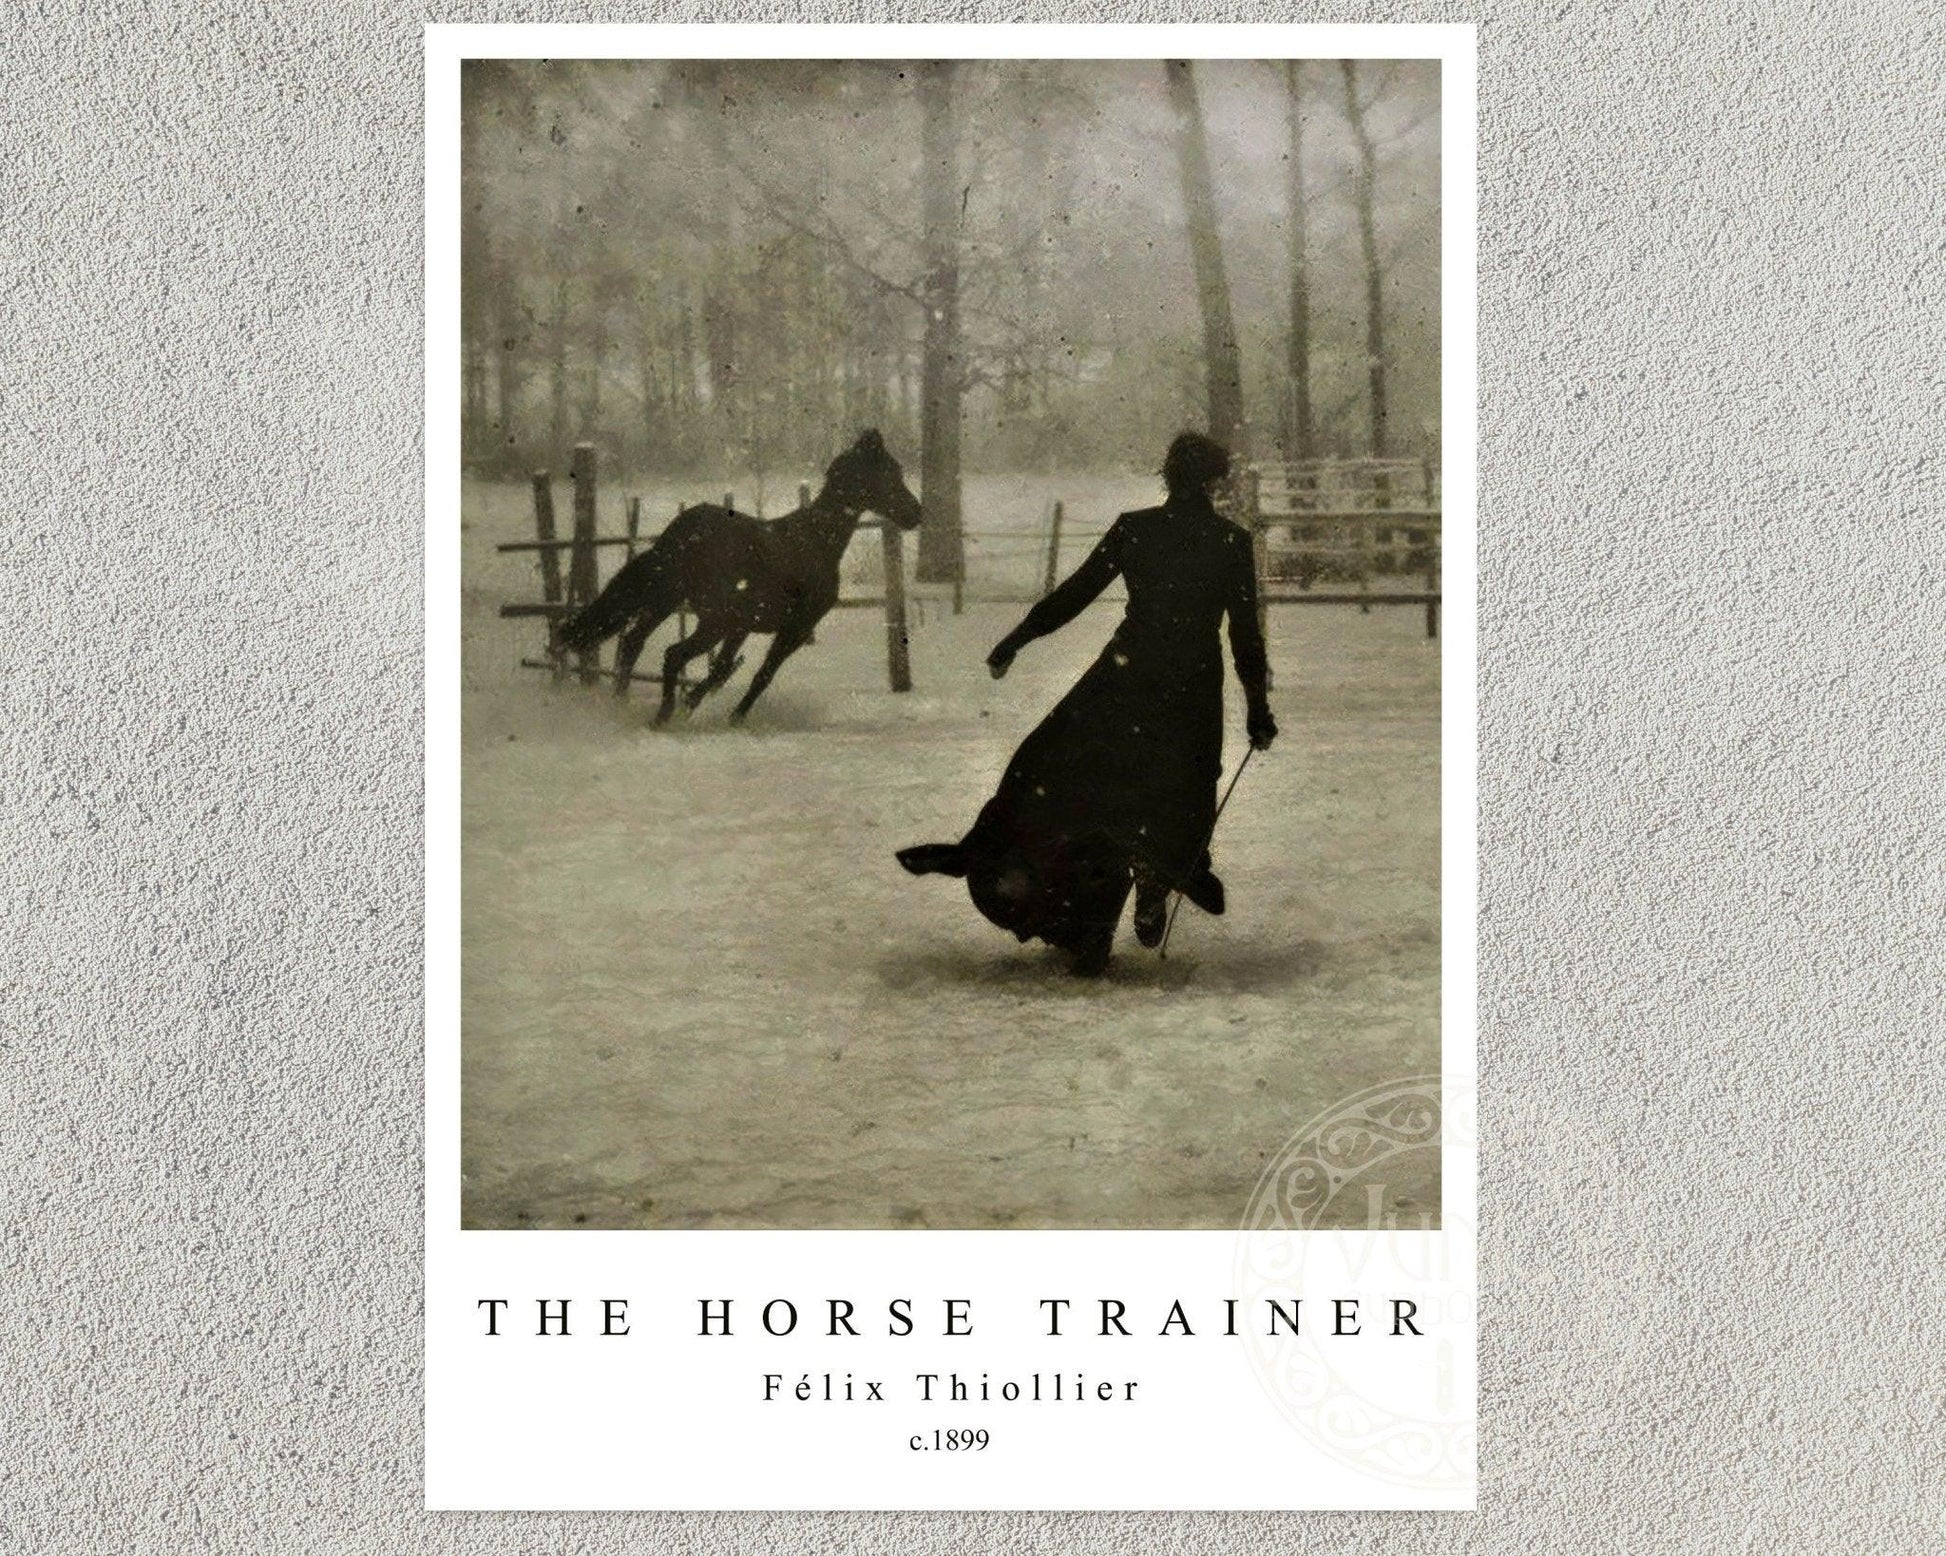 Félix Thiollier "The Horse Trainer" (c.1899) - Mabon Gallery